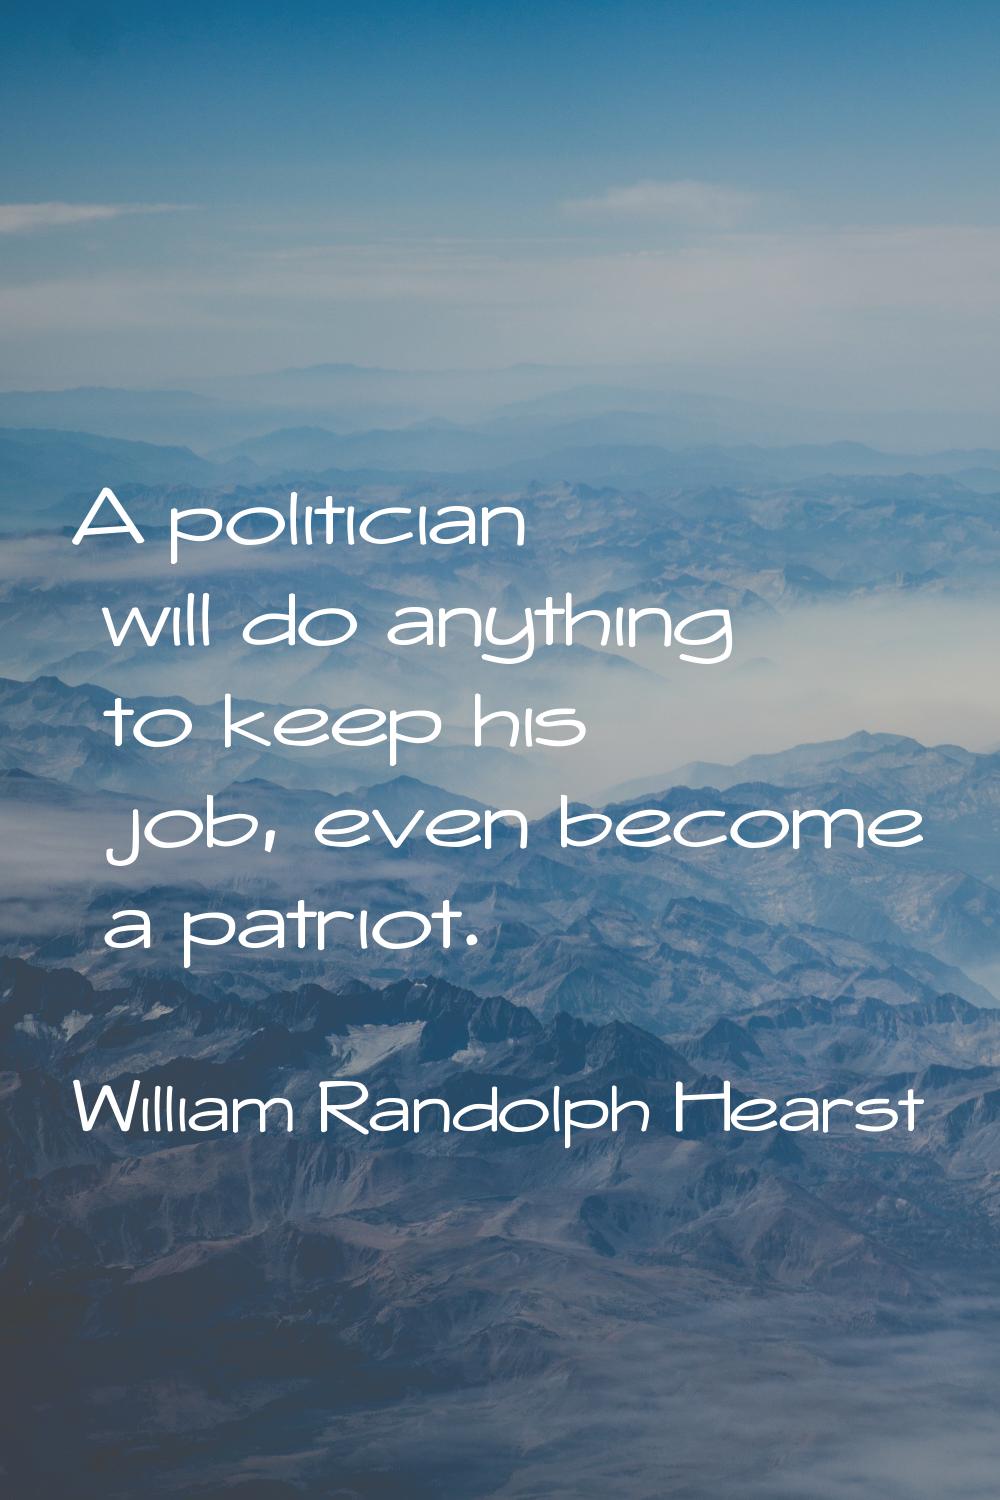 A politician will do anything to keep his job, even become a patriot.